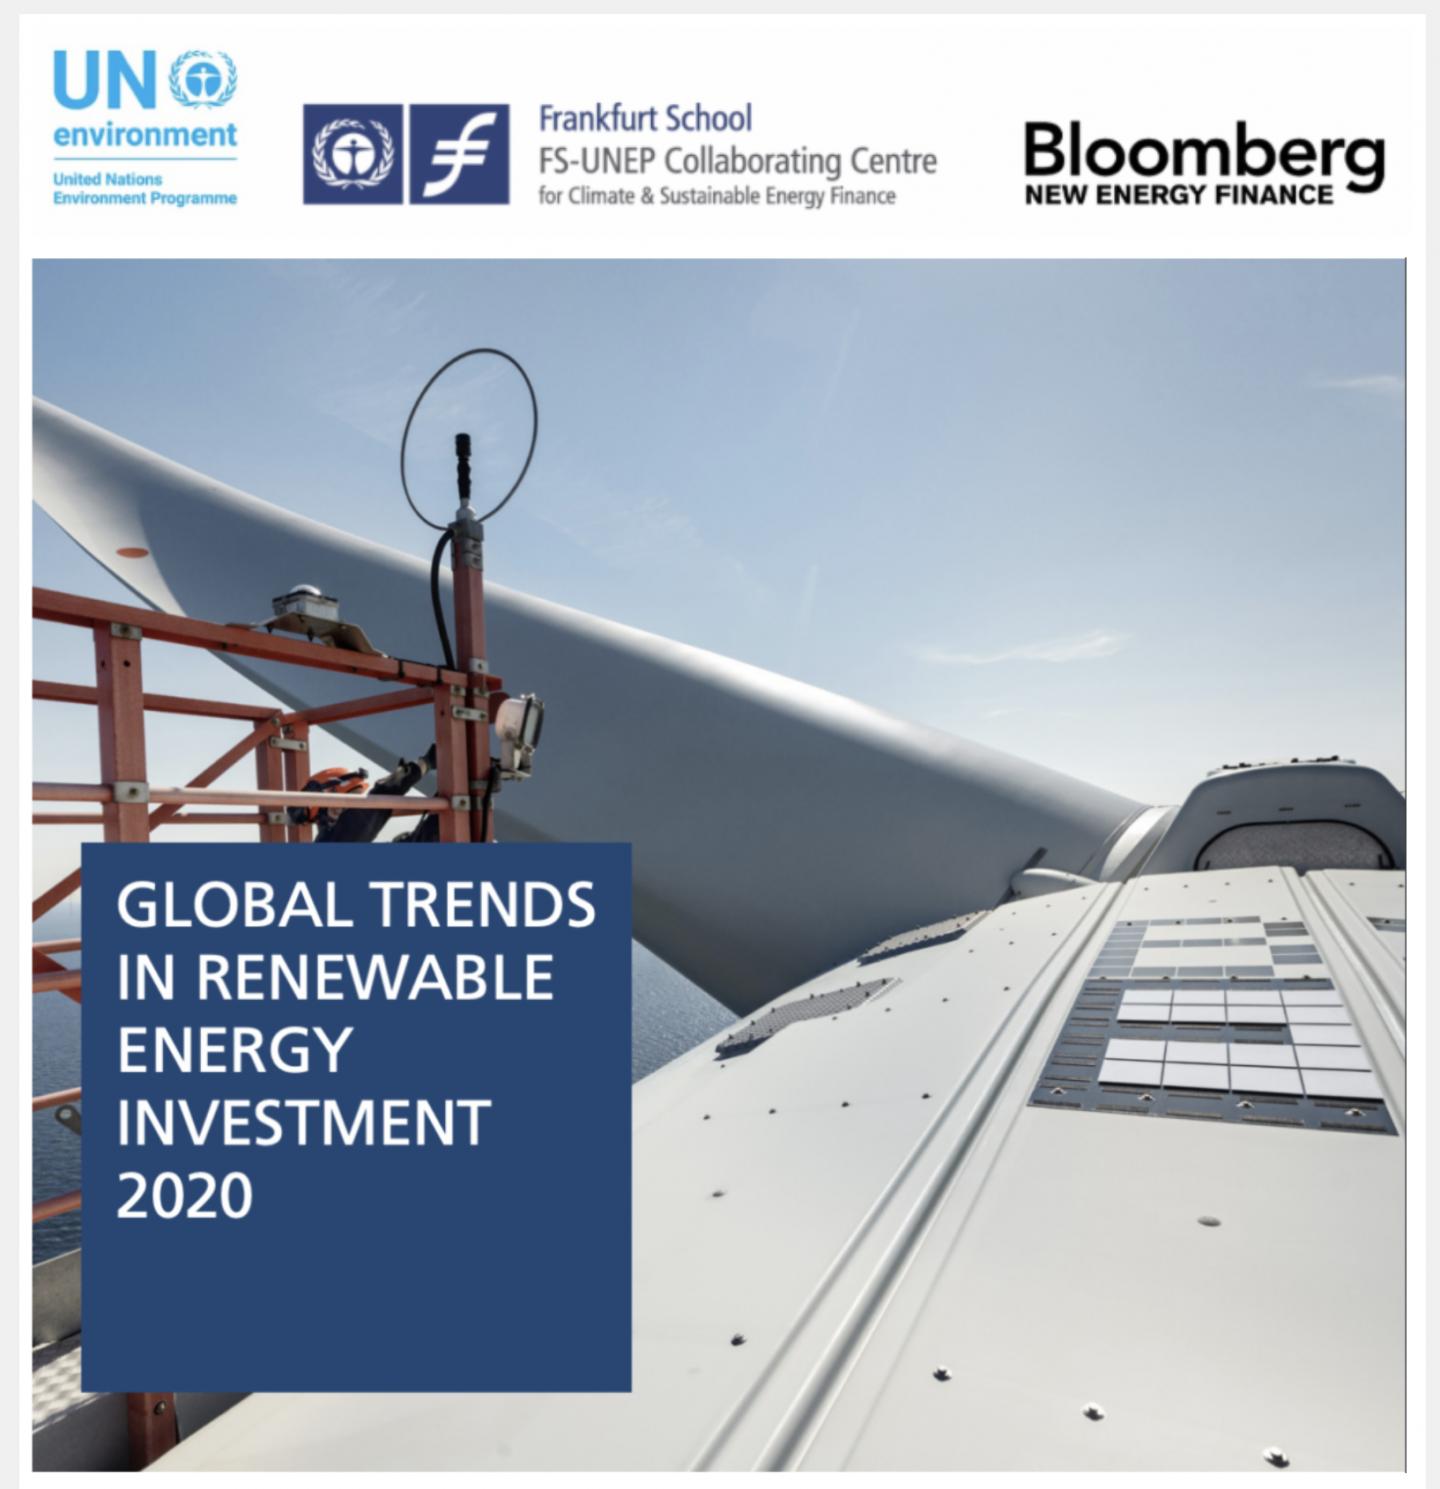 Global Trends in Renewable Energy Investments 2020